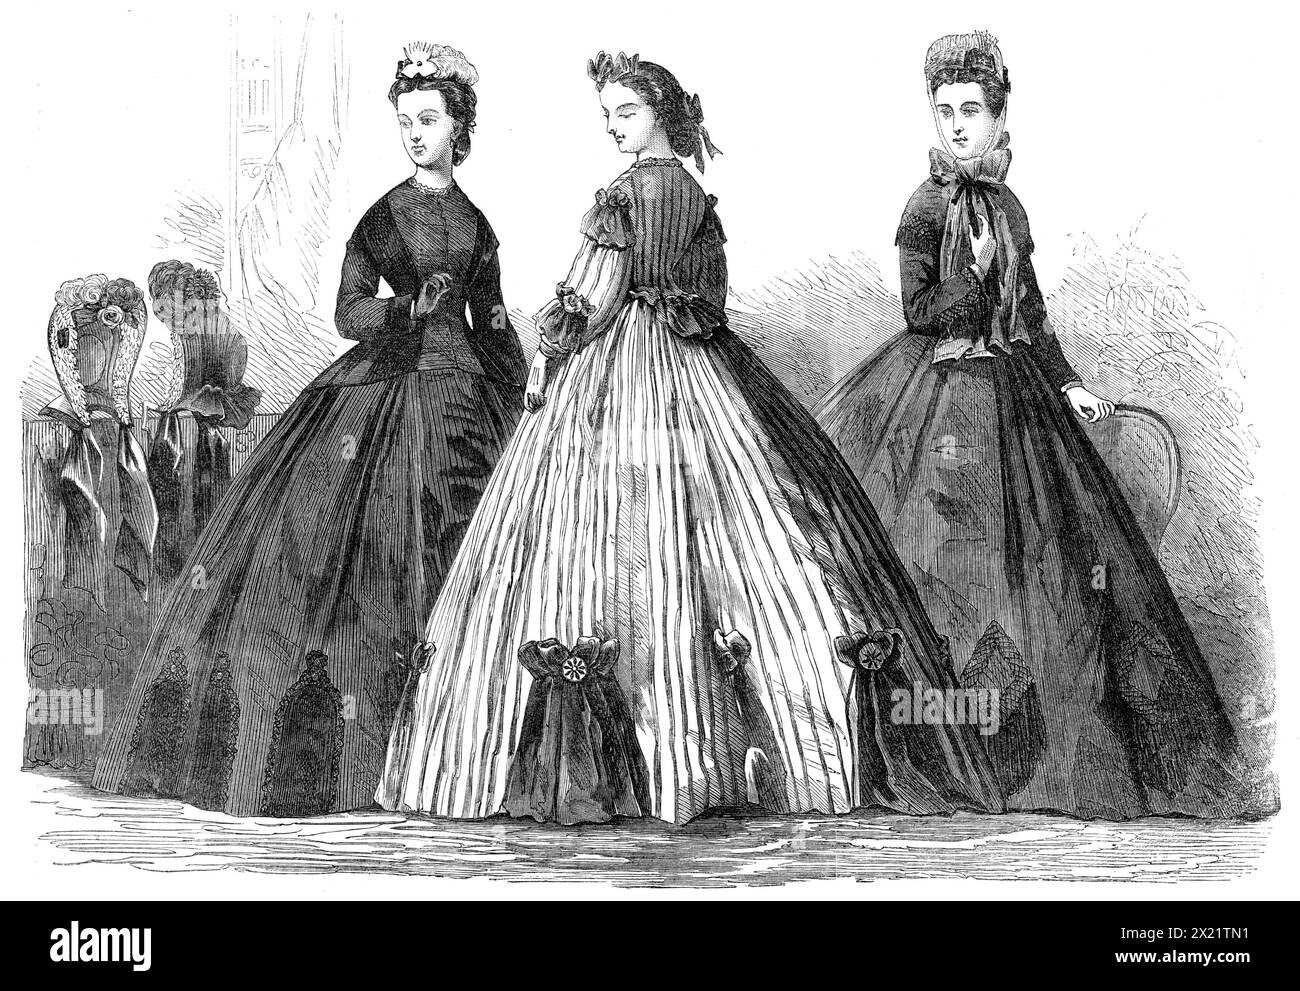 Paris fashions for April, 1864. 'Fig. 1. Evening Dress. Dark-blue moire antique robe, trimmed with velvet...Each velvet ornament on the skirt is bordered with black lace. The corsage &#xe0; basque, opening behind, composed of moire and velvet, and velvet trimming is also applied to the sleeves. The head-dress is composed of a white feather, a yellow butterfly, and an aigrette, Very narrow lace collar. Fig. 2. Toilet for a Young Lady. Robe of stone-coloured taffeta, with violet stripes, ornamented round the skirt with portions of plaited flounces, fastened by a bow in passementerie. Corsage pos Stock Photo